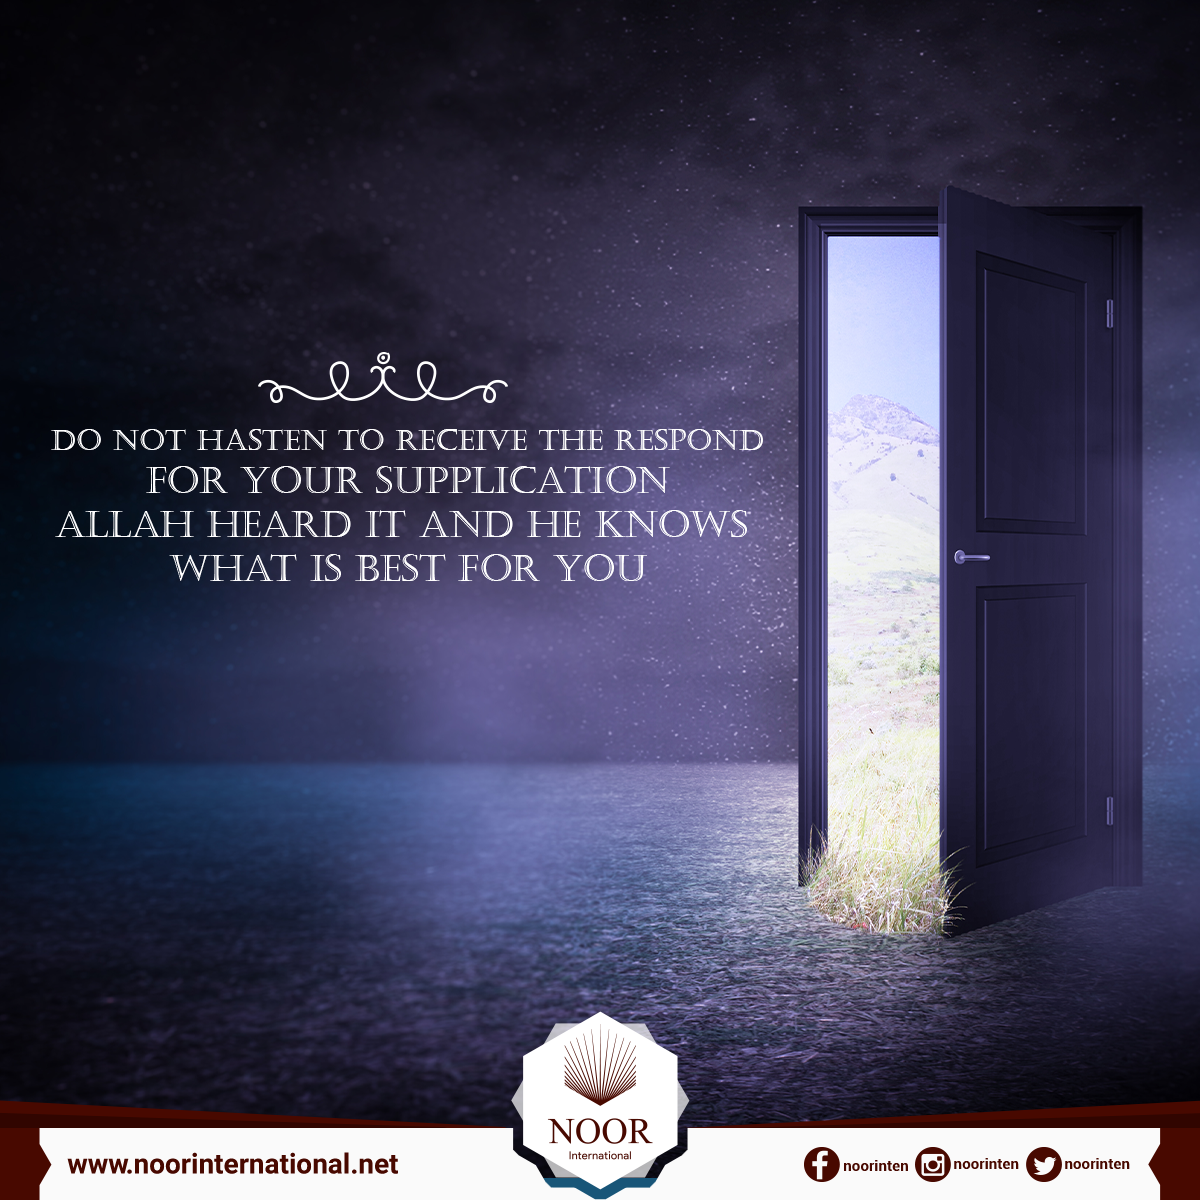 Do not hasten to receive the respond for your supplication, Allah heard it and he knows what is best for you